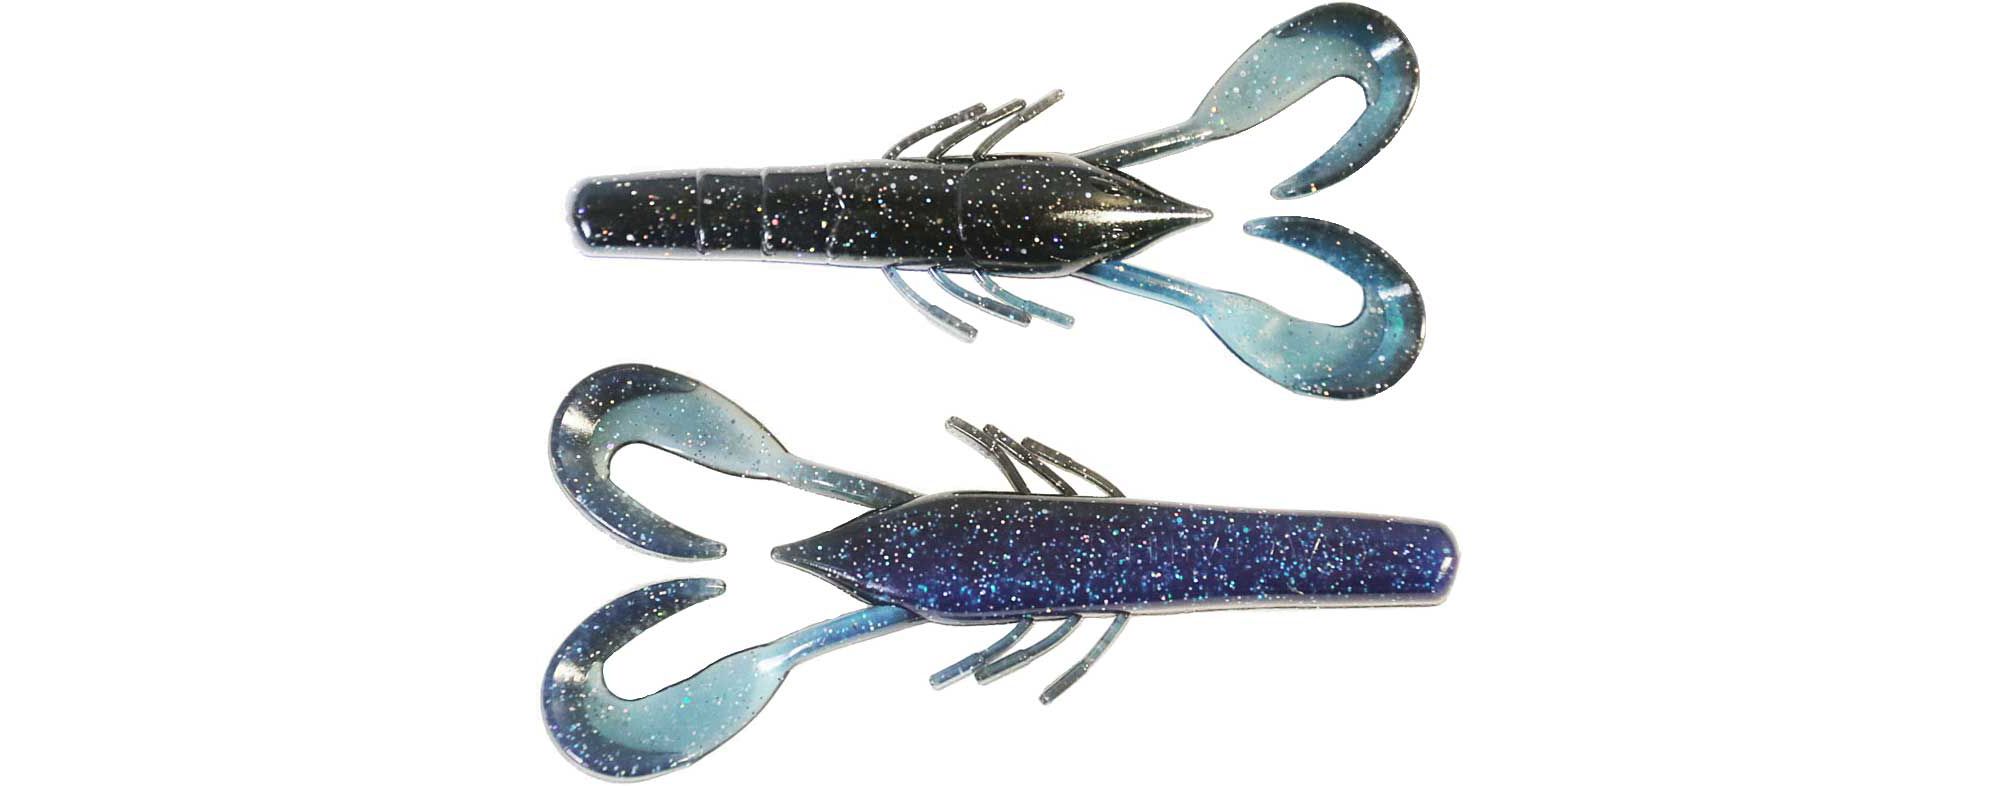 Missile Baits Craw Father Wicked Craw – 129 Fishing